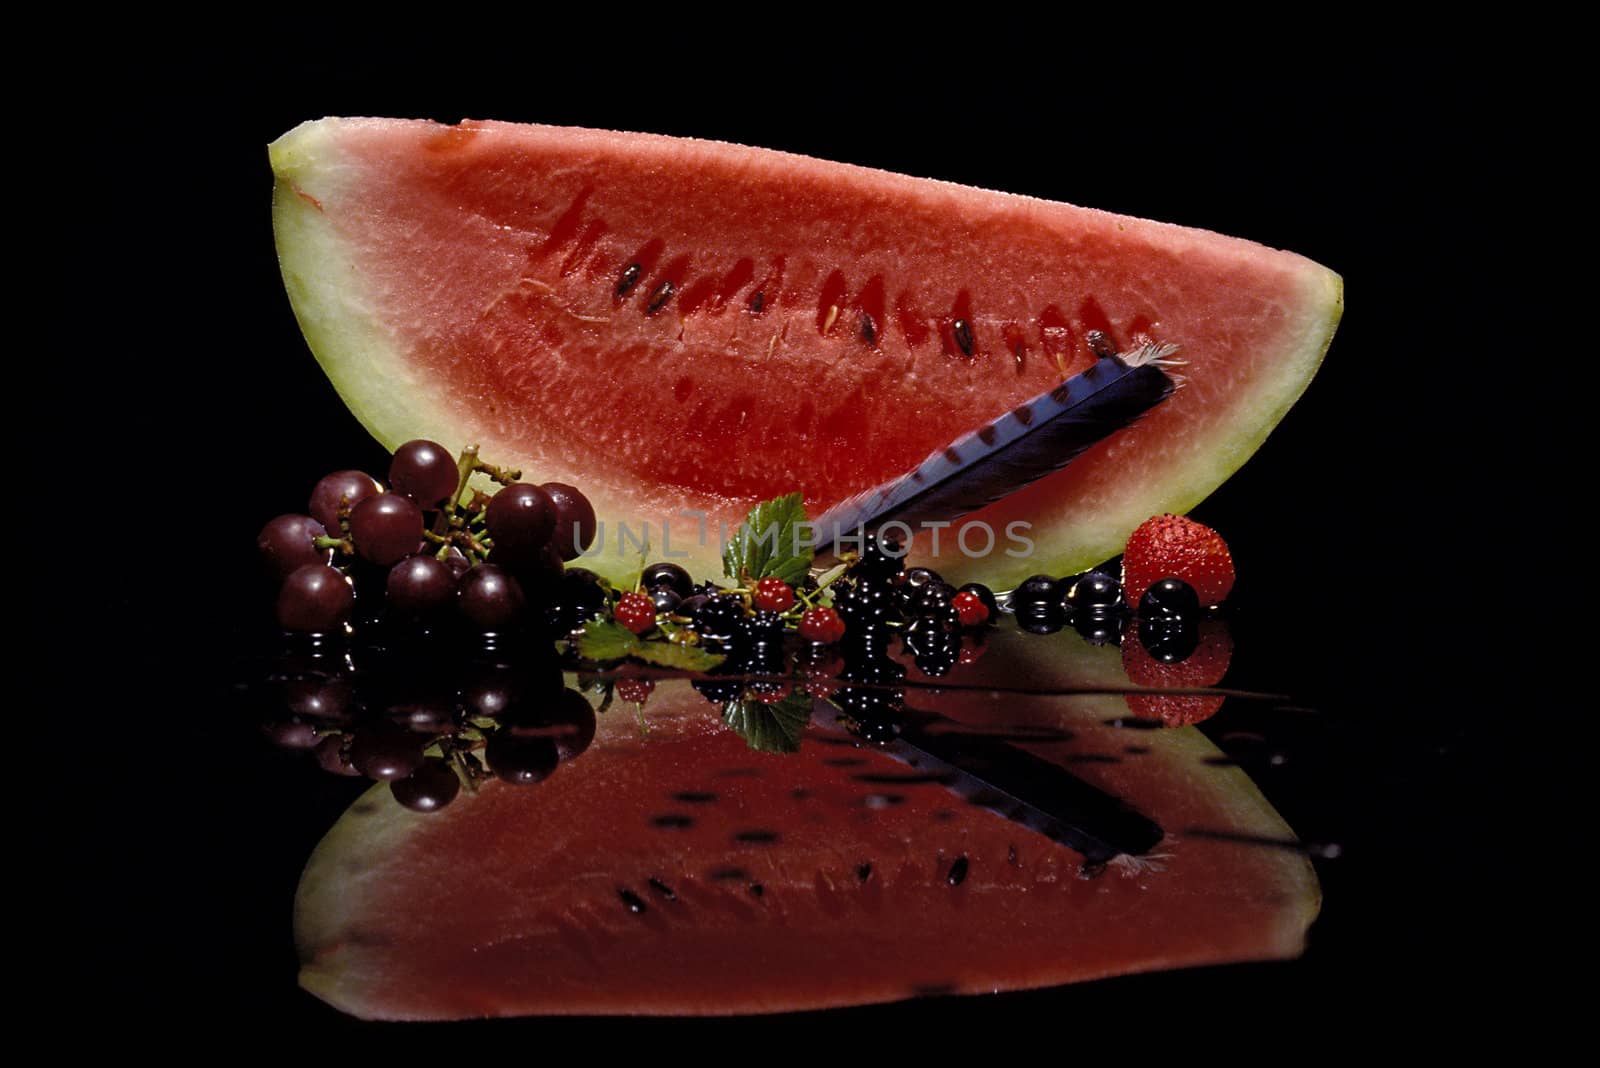 A slice of watermelon with mixed fruit on a reflective background